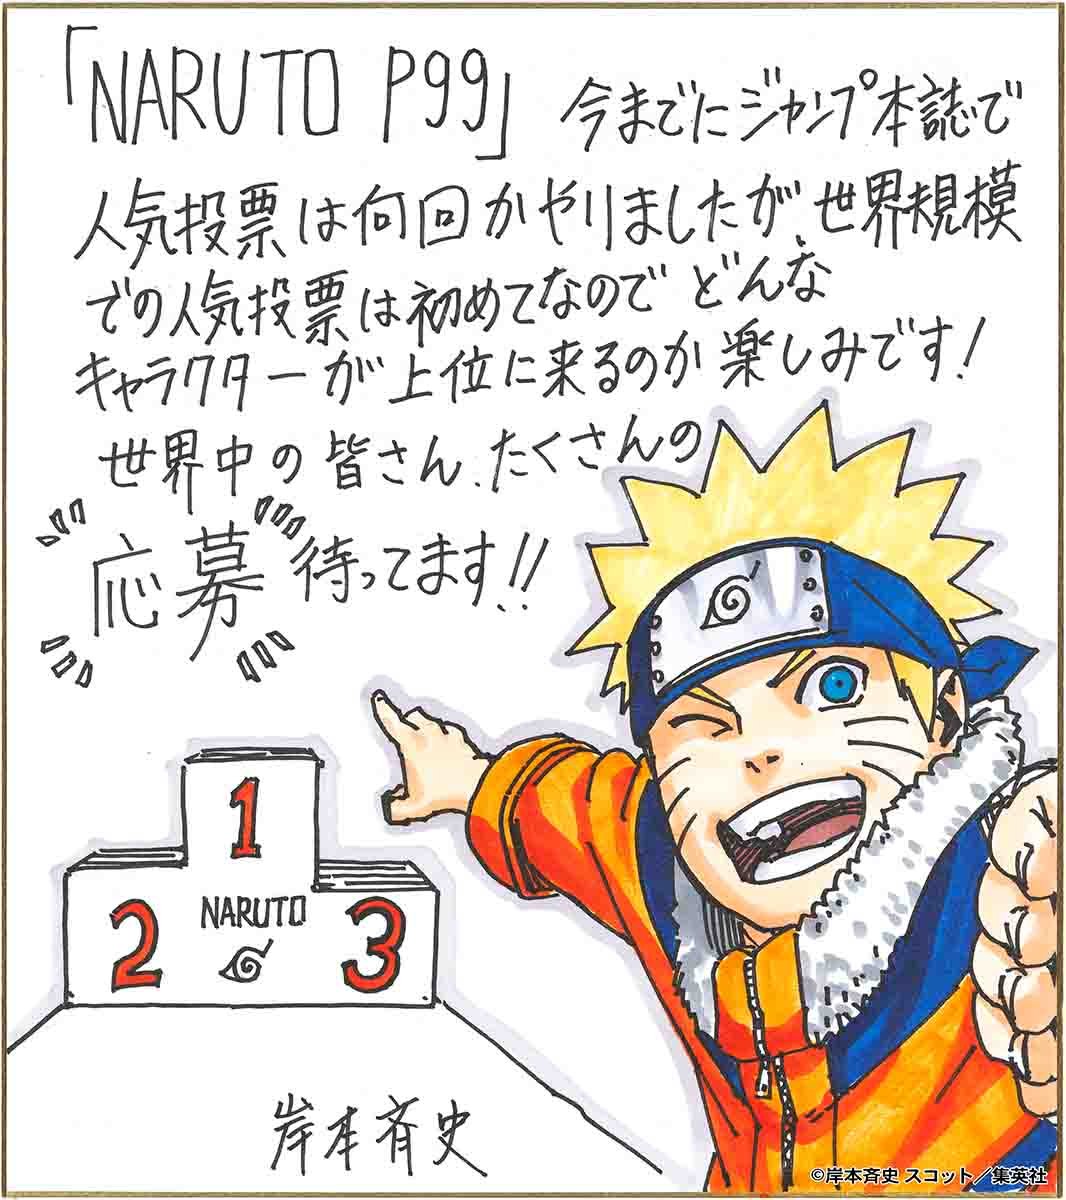 New Naruto Top 99 Special Character Poll Asks About Akatsuki Members